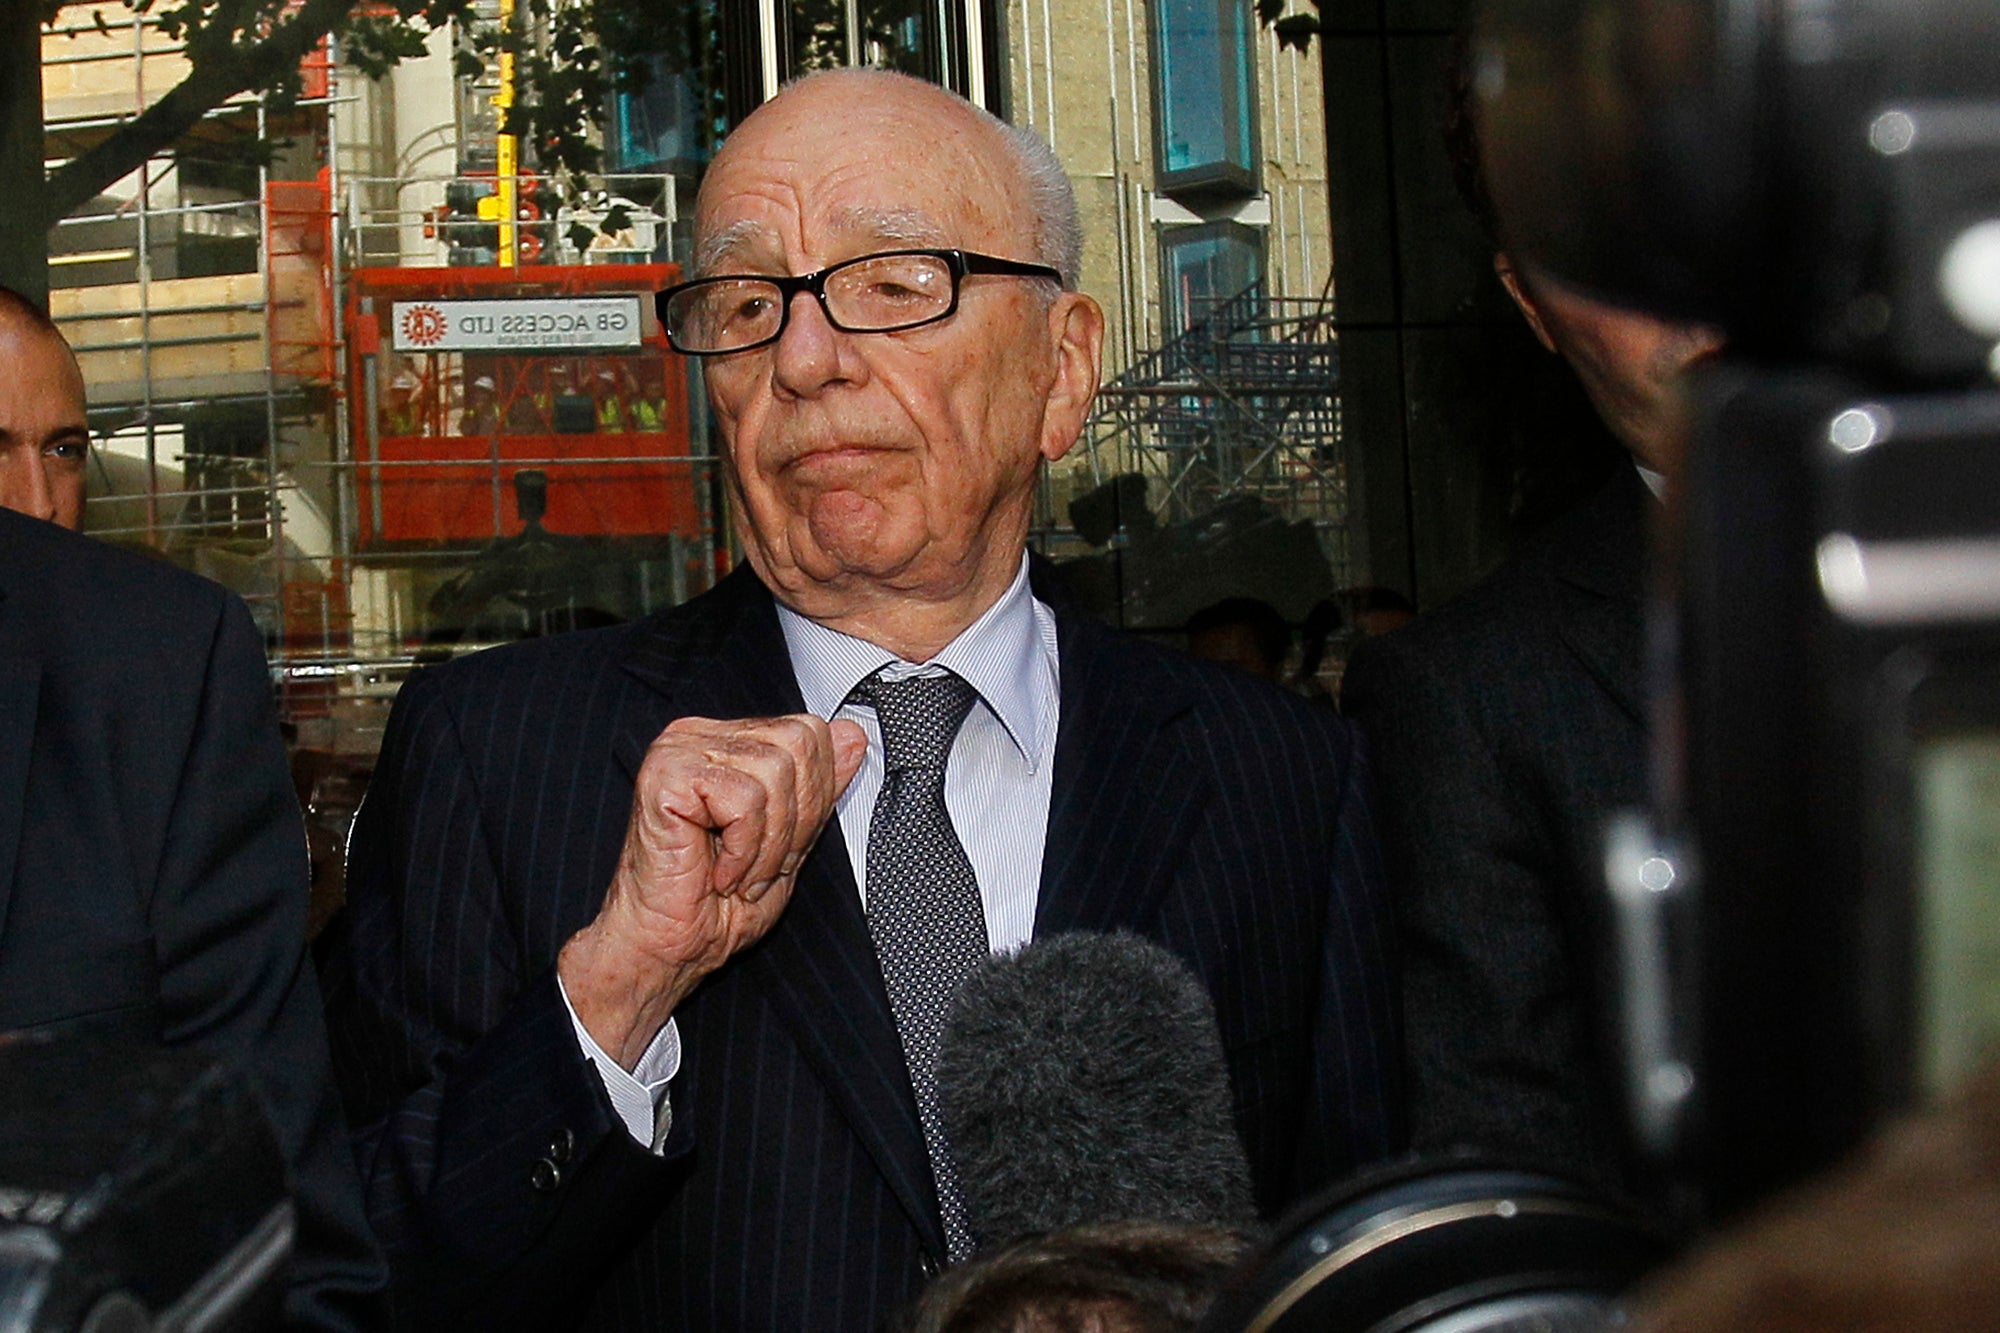 Lawyers for Harry claim media mogul Rupert Murdoch was involved in the phone hacking cover up